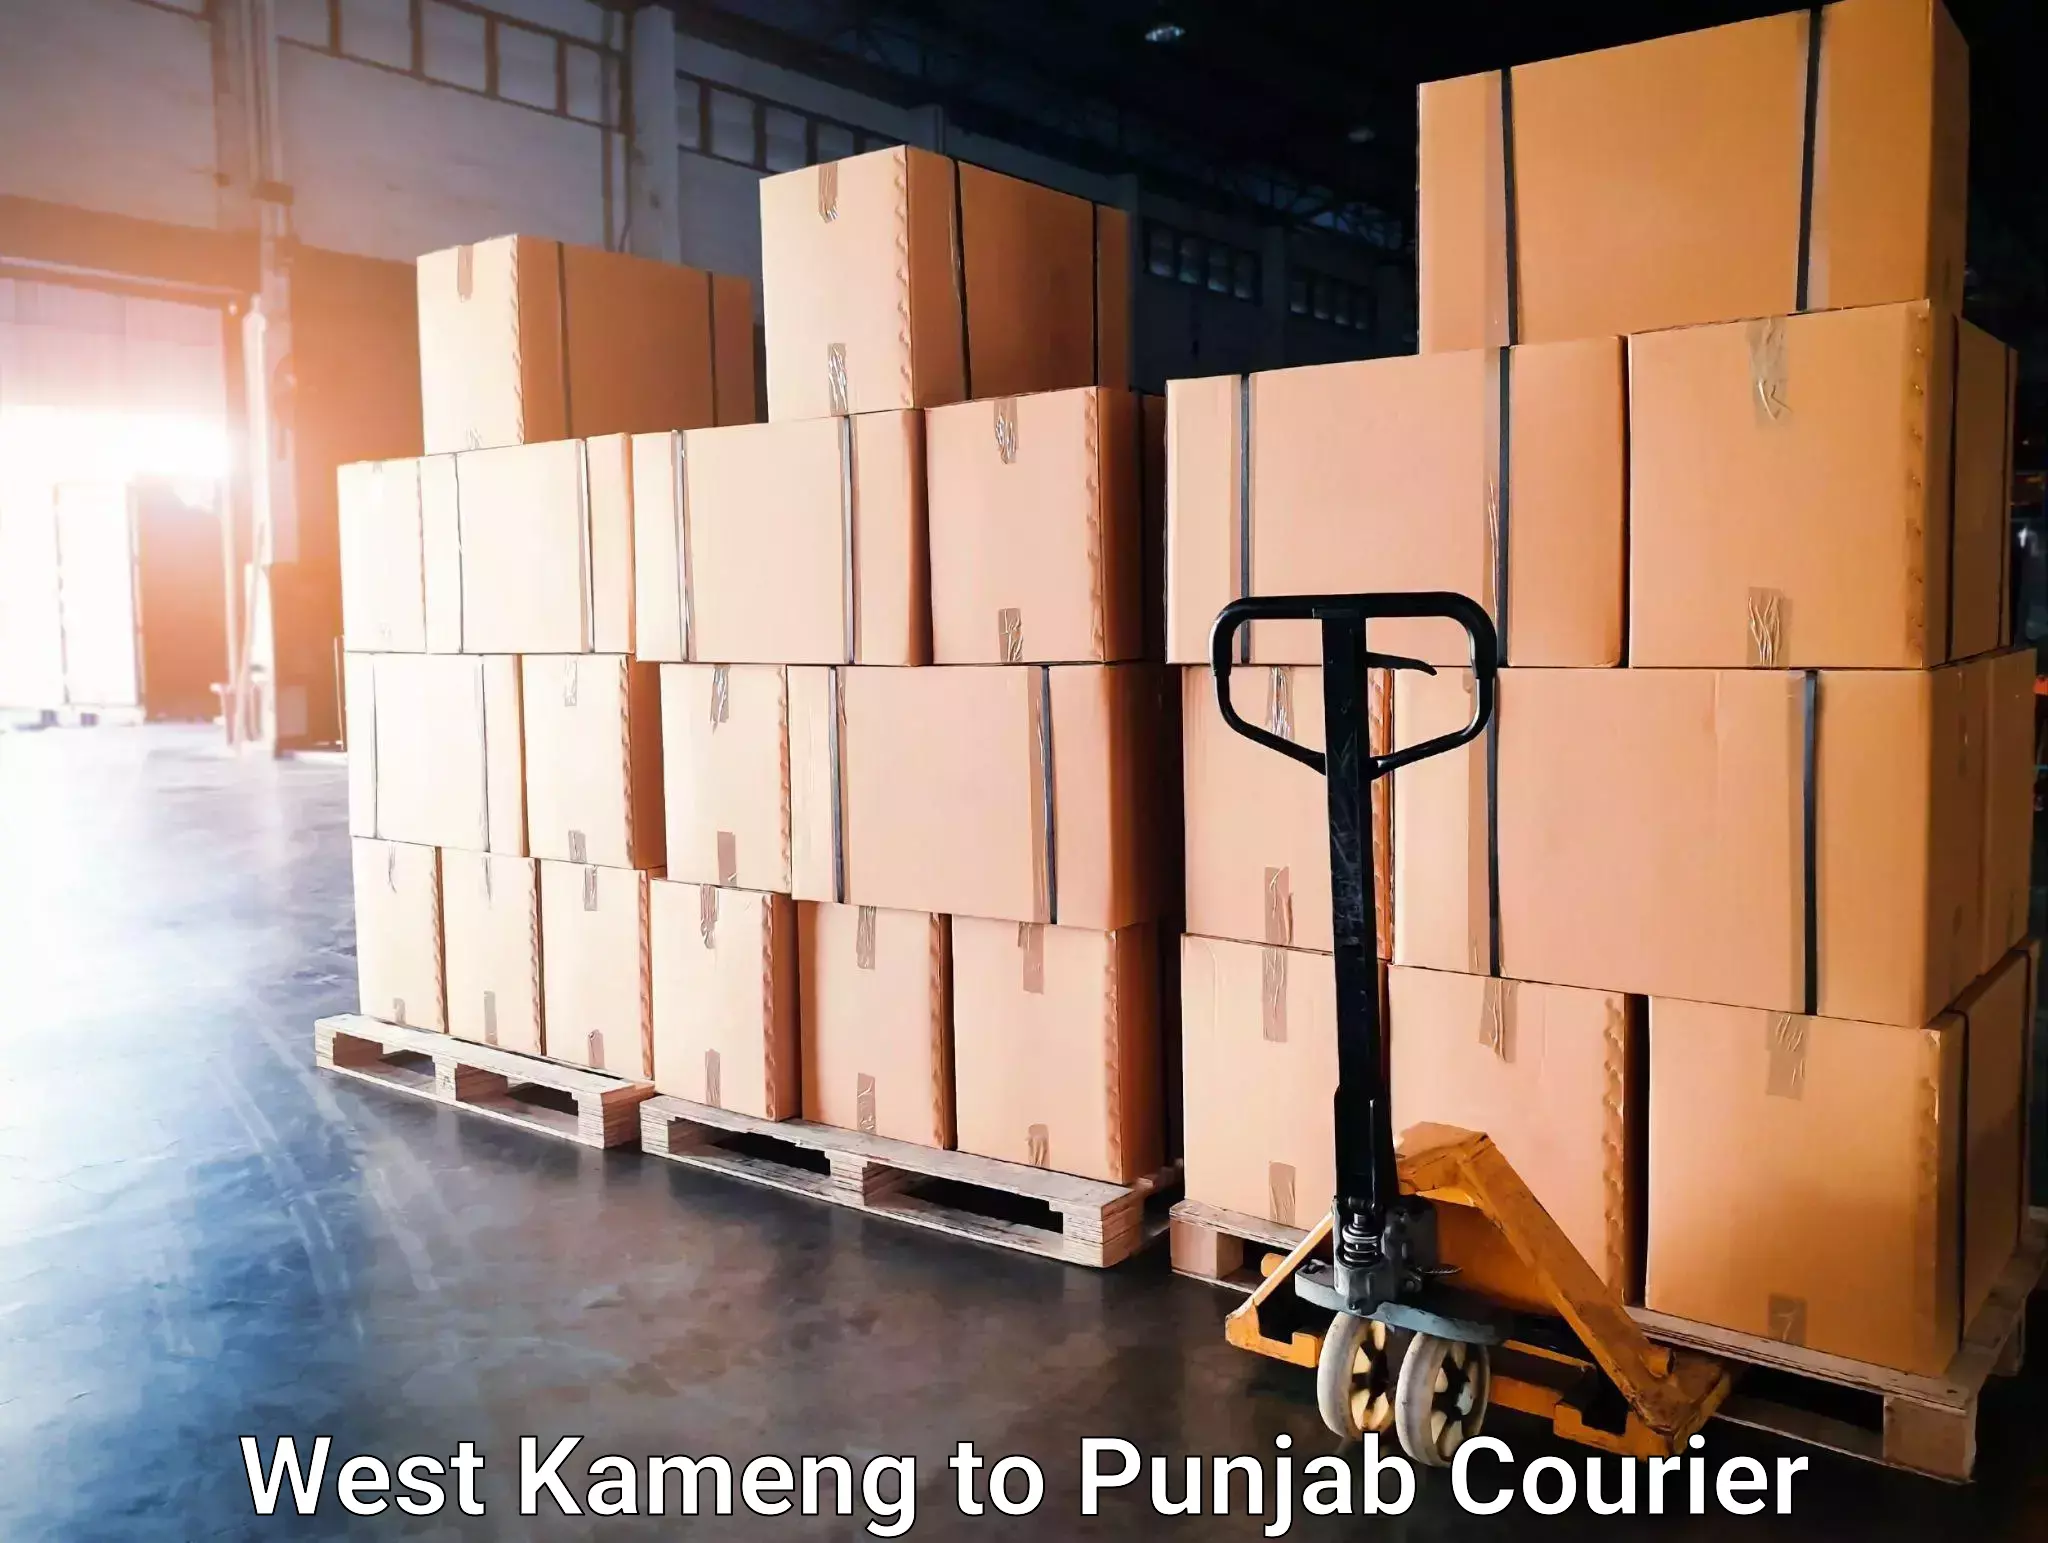 Multi-national courier services West Kameng to Punjab